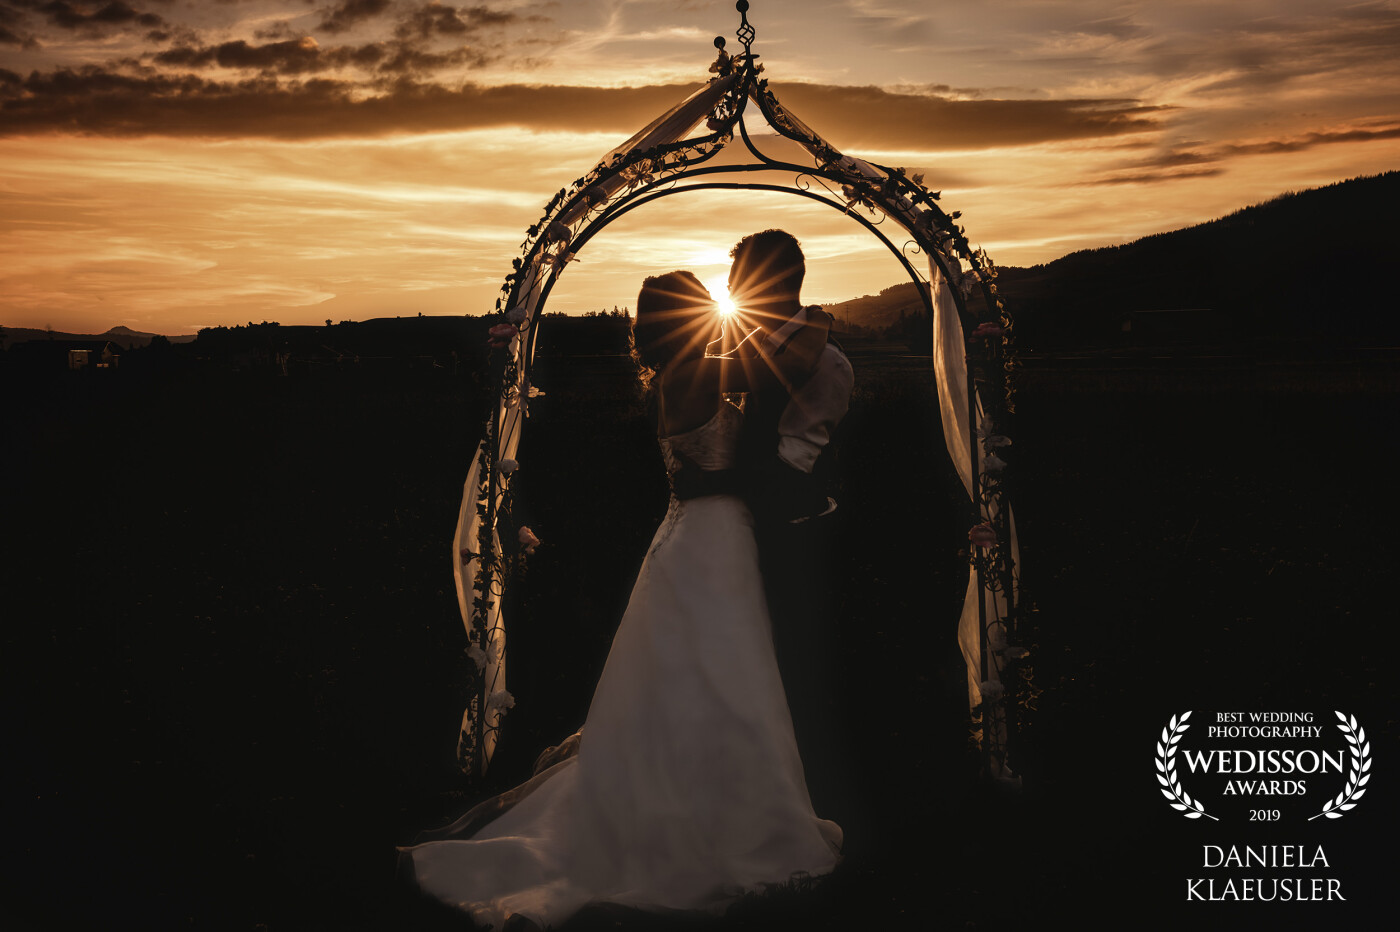 „Someday you will find the one who will watch every sunrise with you until the sunset of your life.“<br />
<br />
This amazing sunset tells everything about that wonderful wedding day from the beginning to the end full with love and joy! 